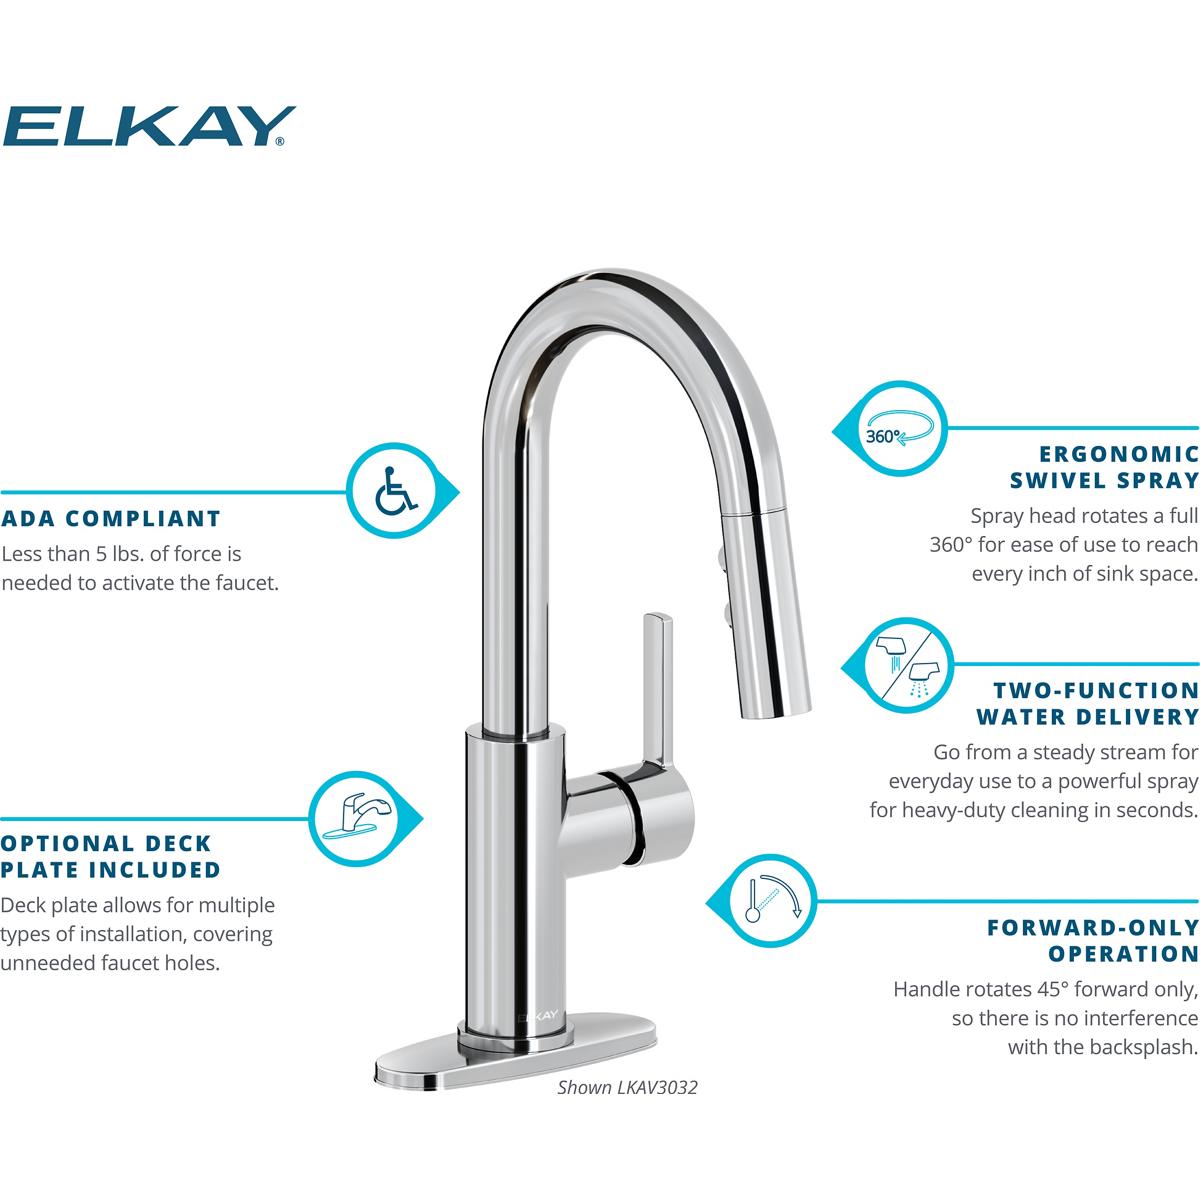 Elkay Avado Single Hole Bar Faucet with Pull-down Spray and Lever Handle